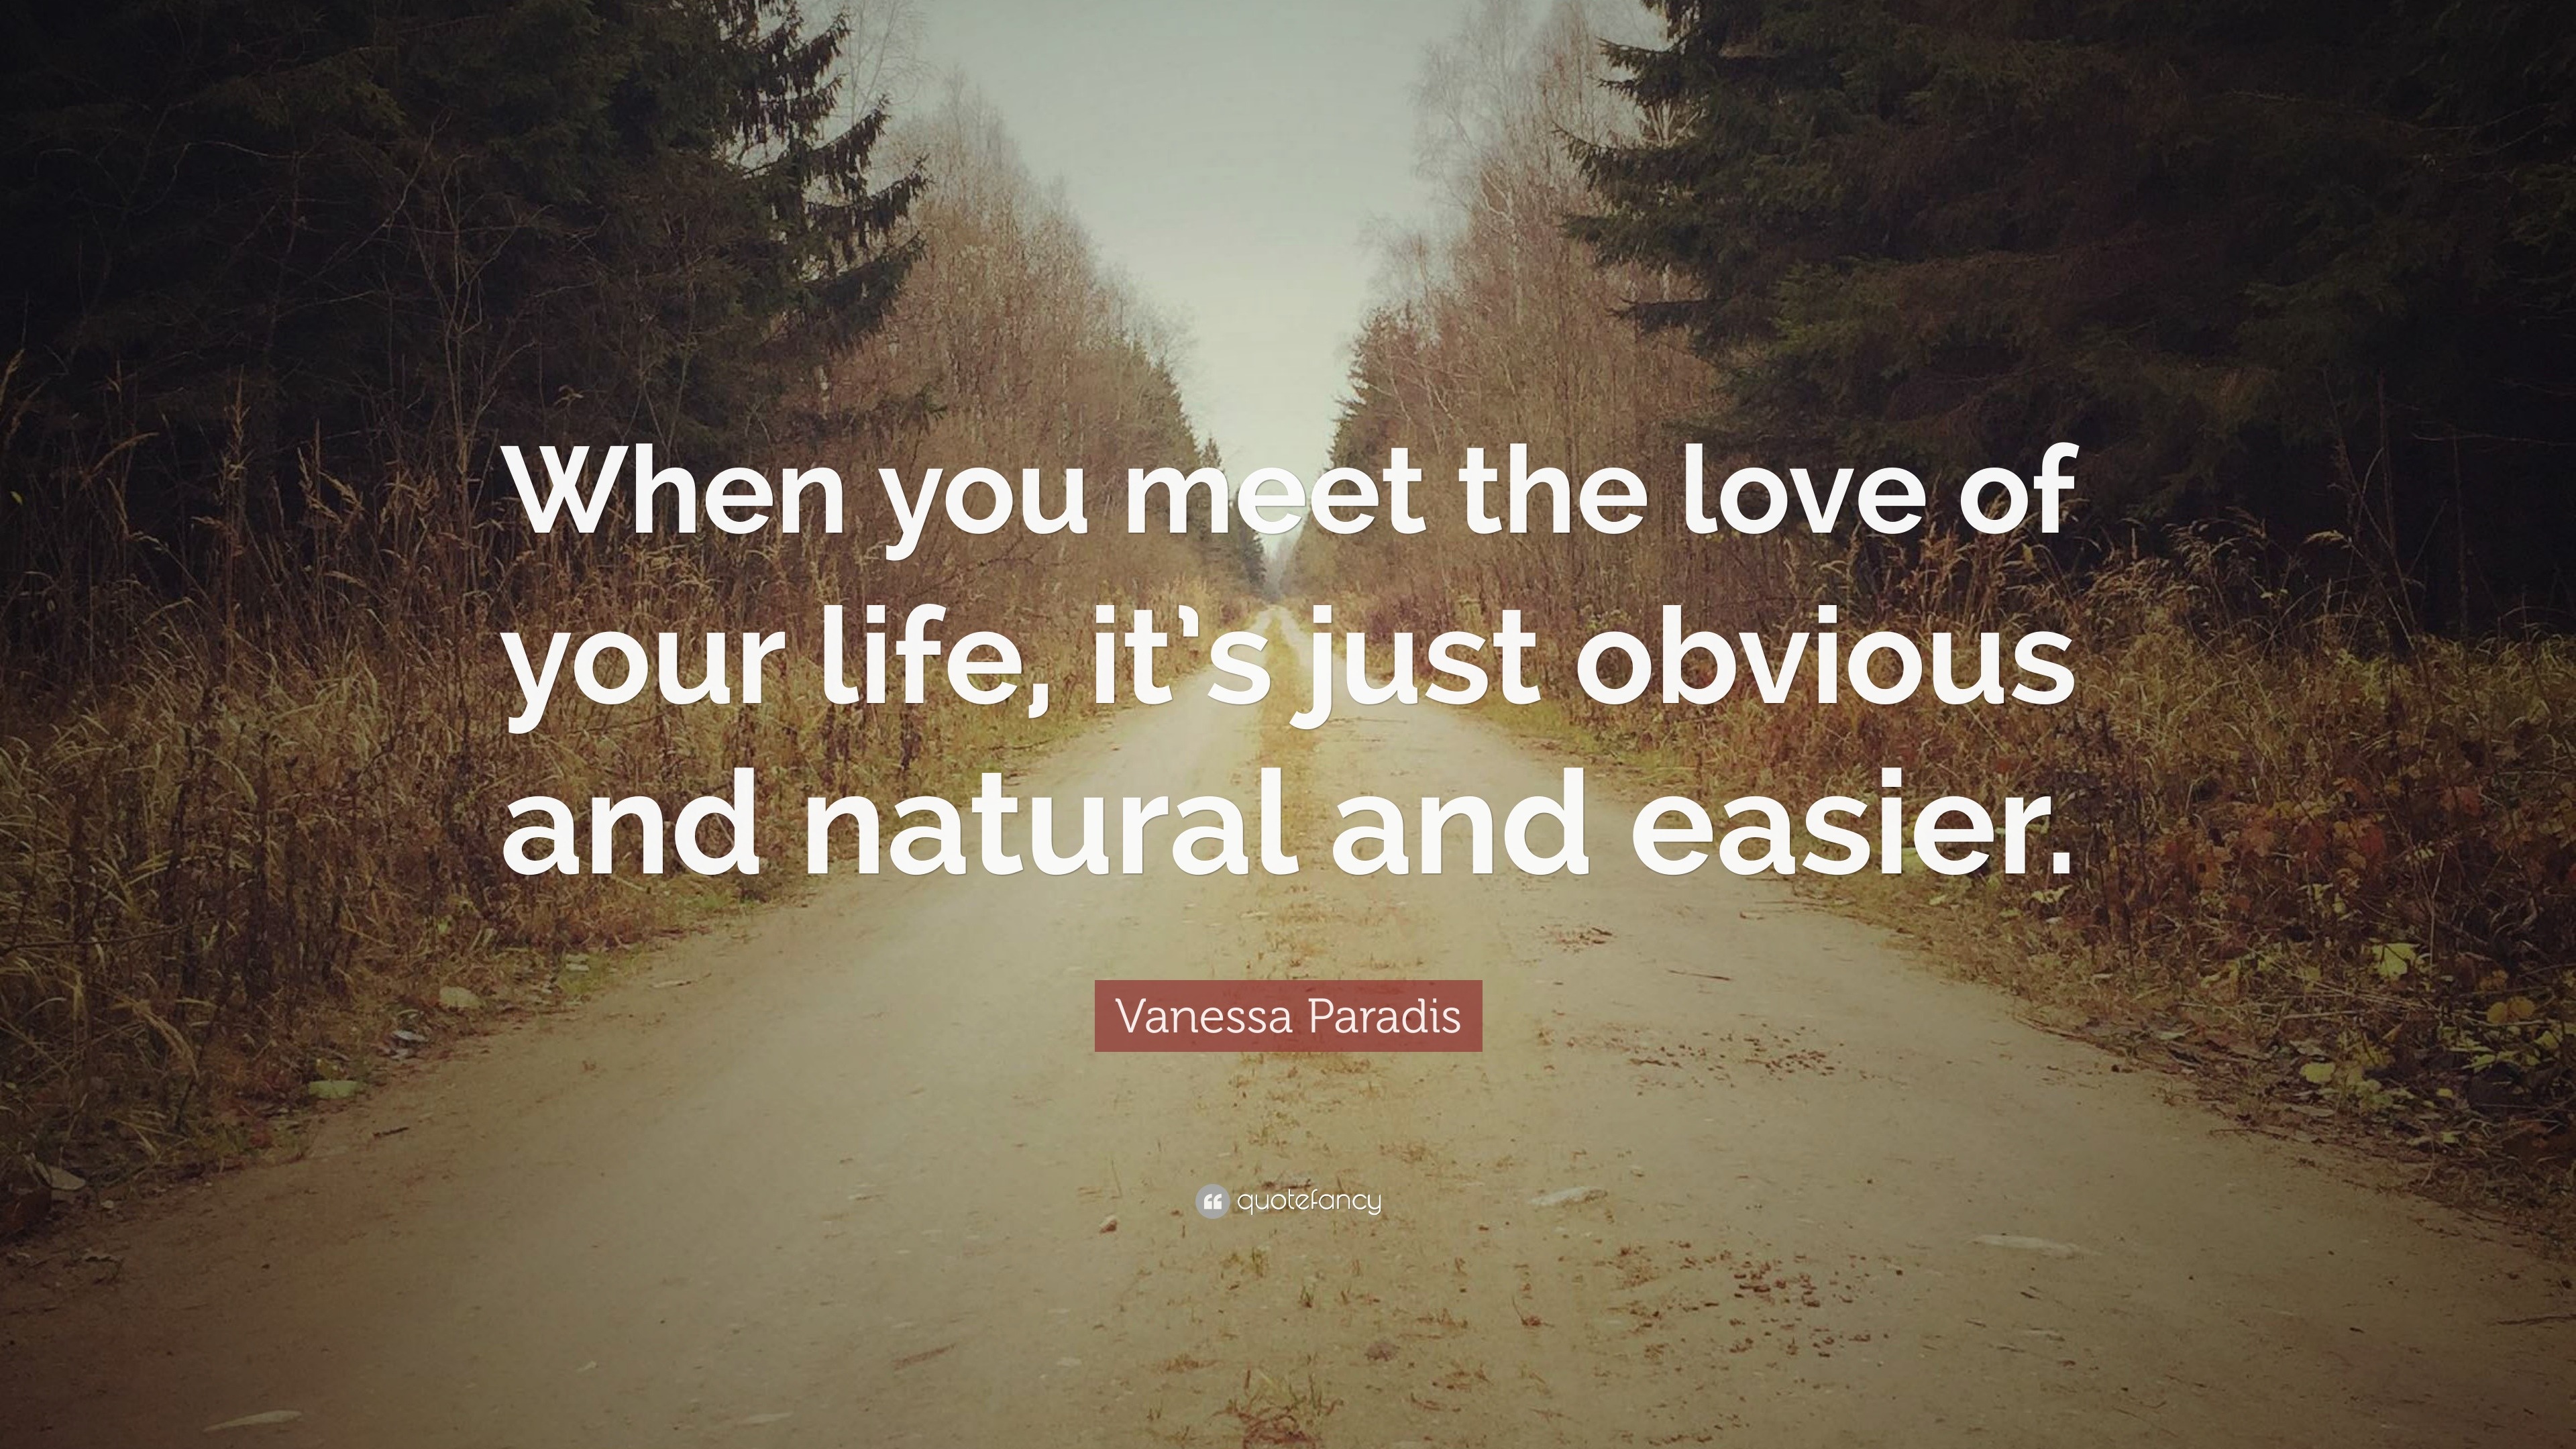 Quote: “When meet the love of your life, it's just obvious and natural